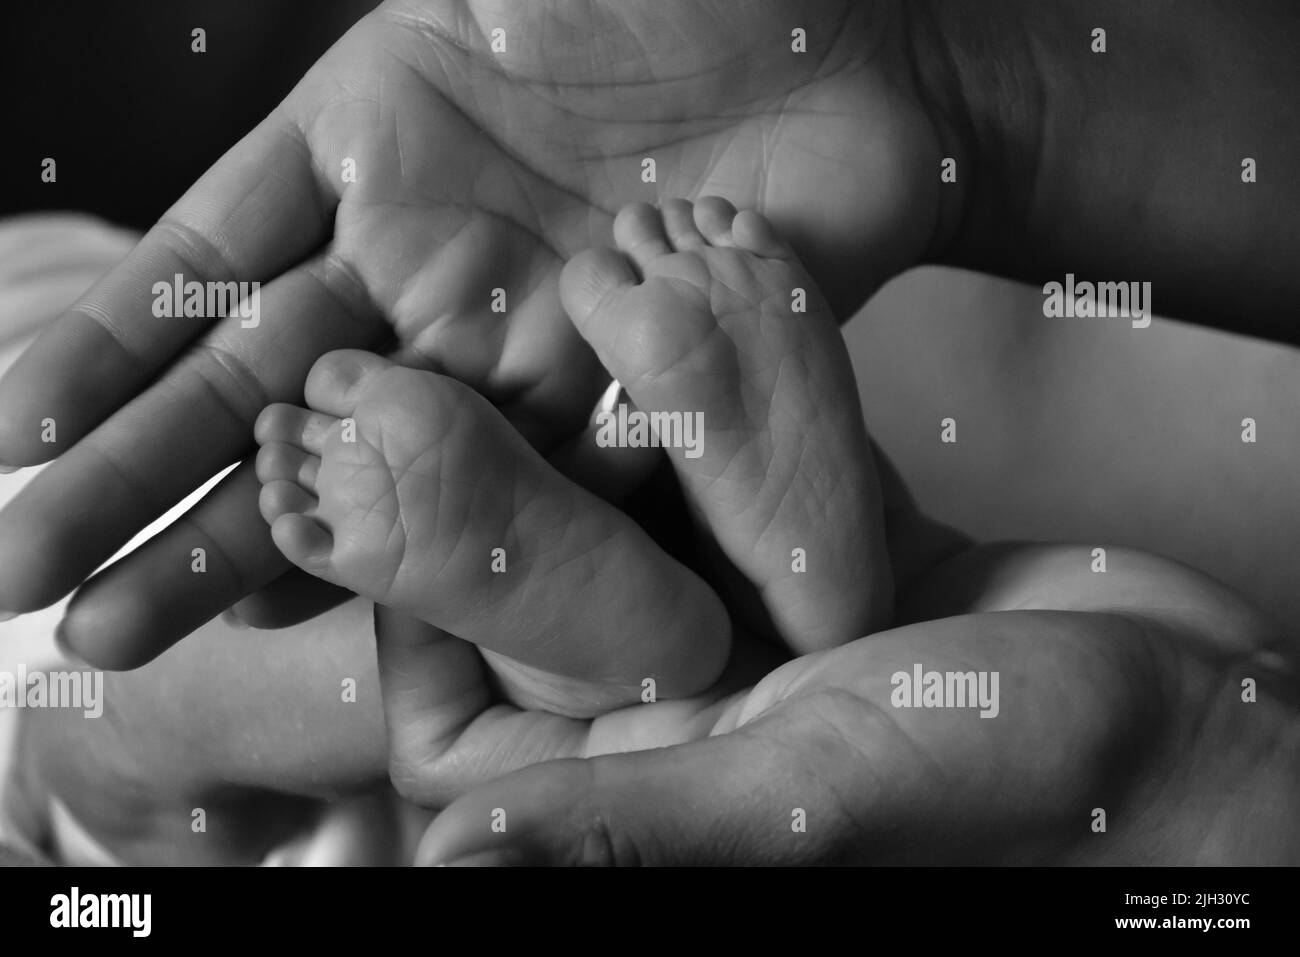 Mother holding newborn baby's feet in black and white Stock Photo